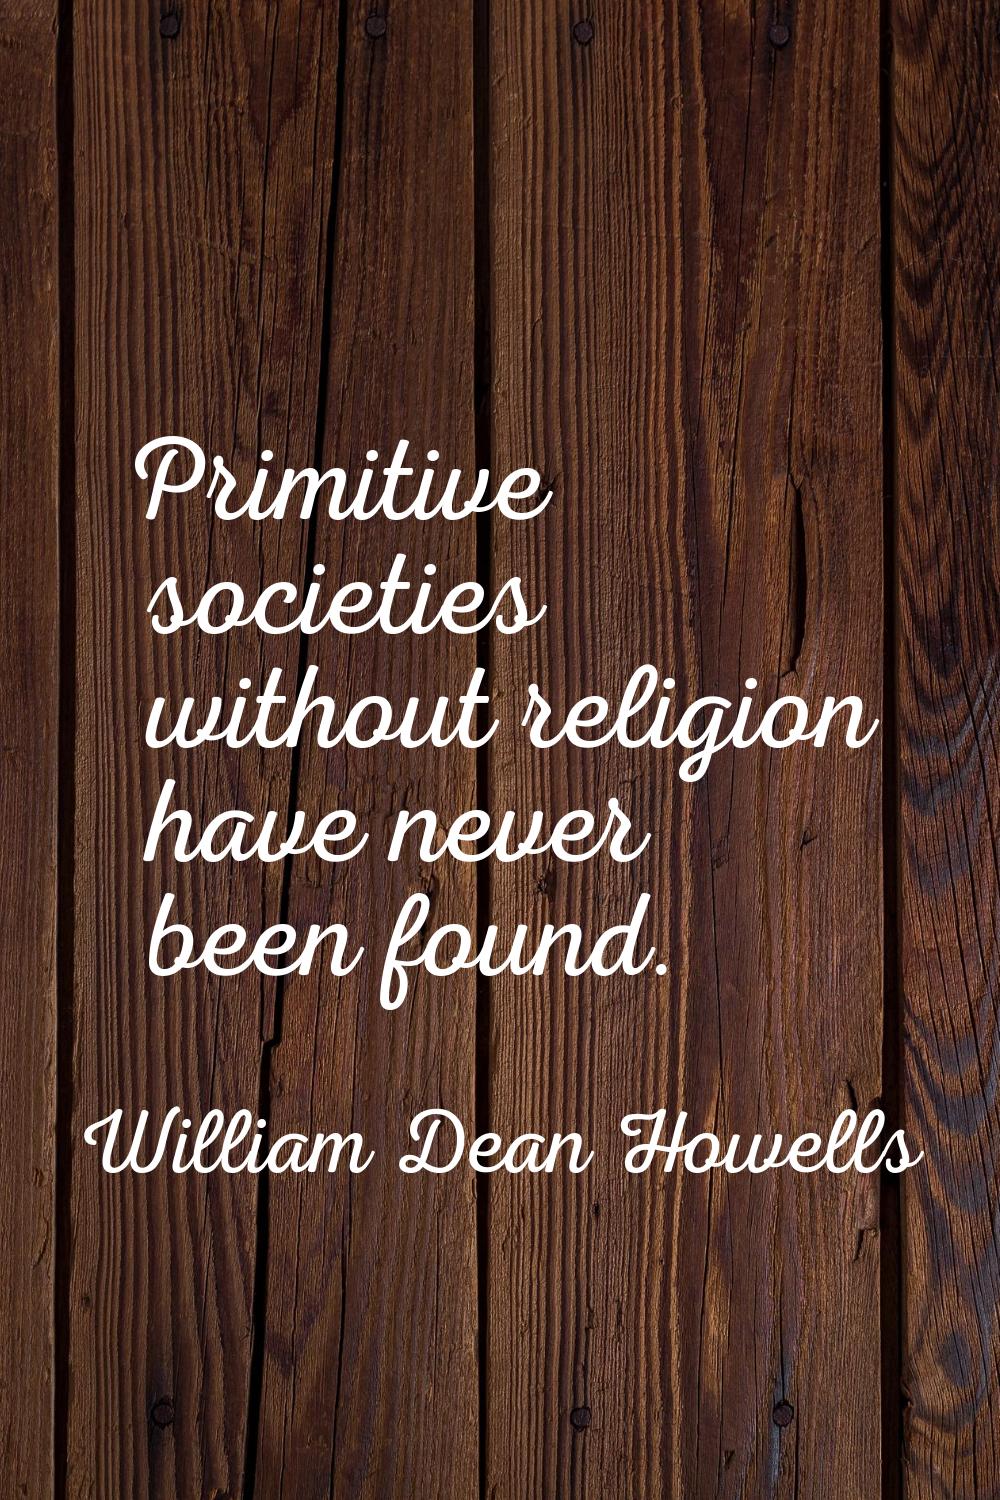 Primitive societies without religion have never been found.